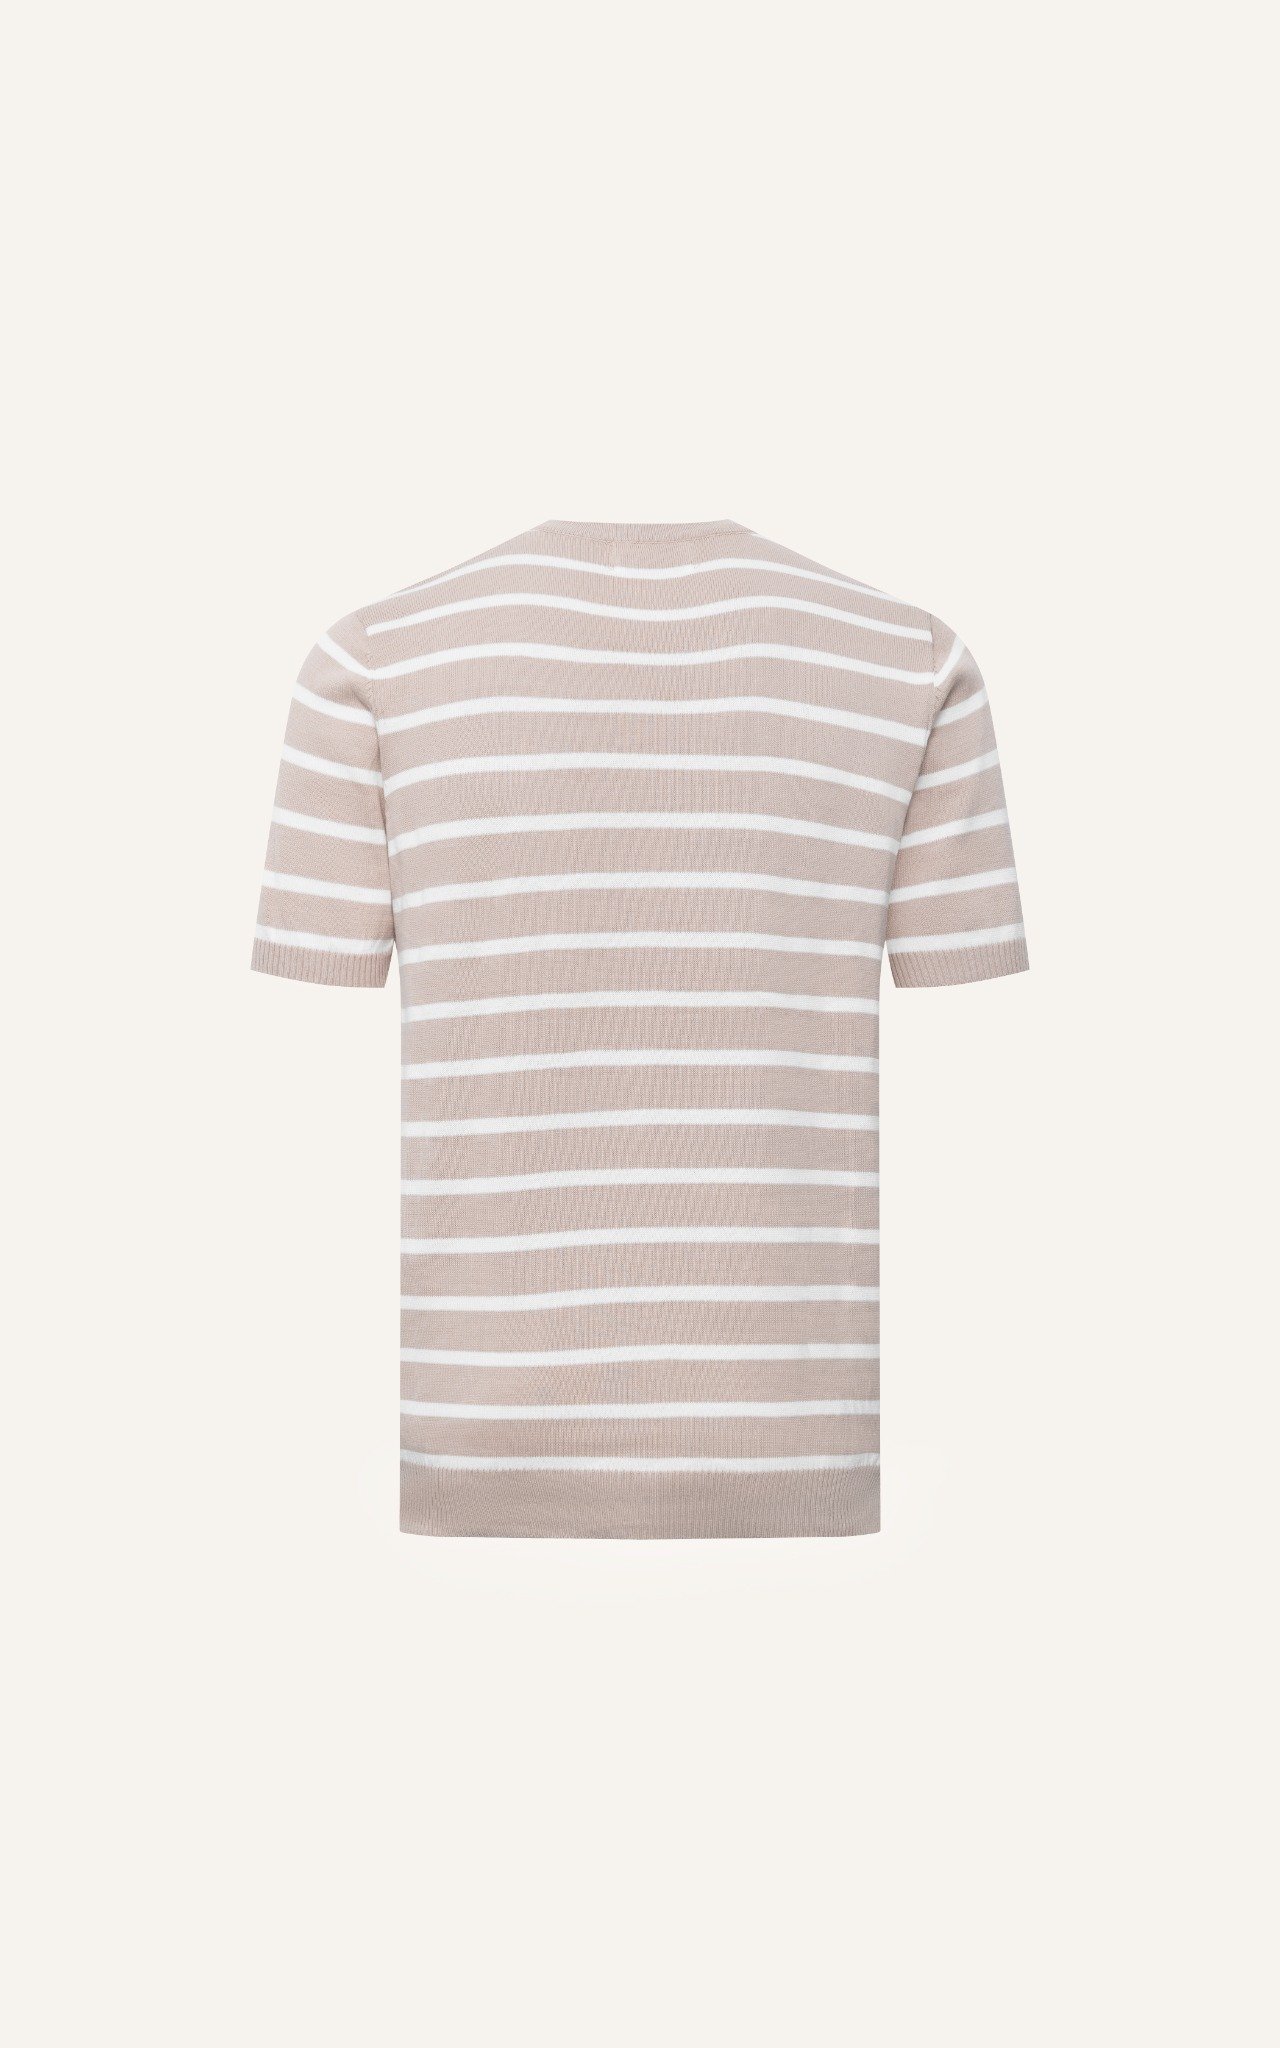 AG51 FACTORY REGULAR FIT STRIPED KNIT POLO - BEIGE